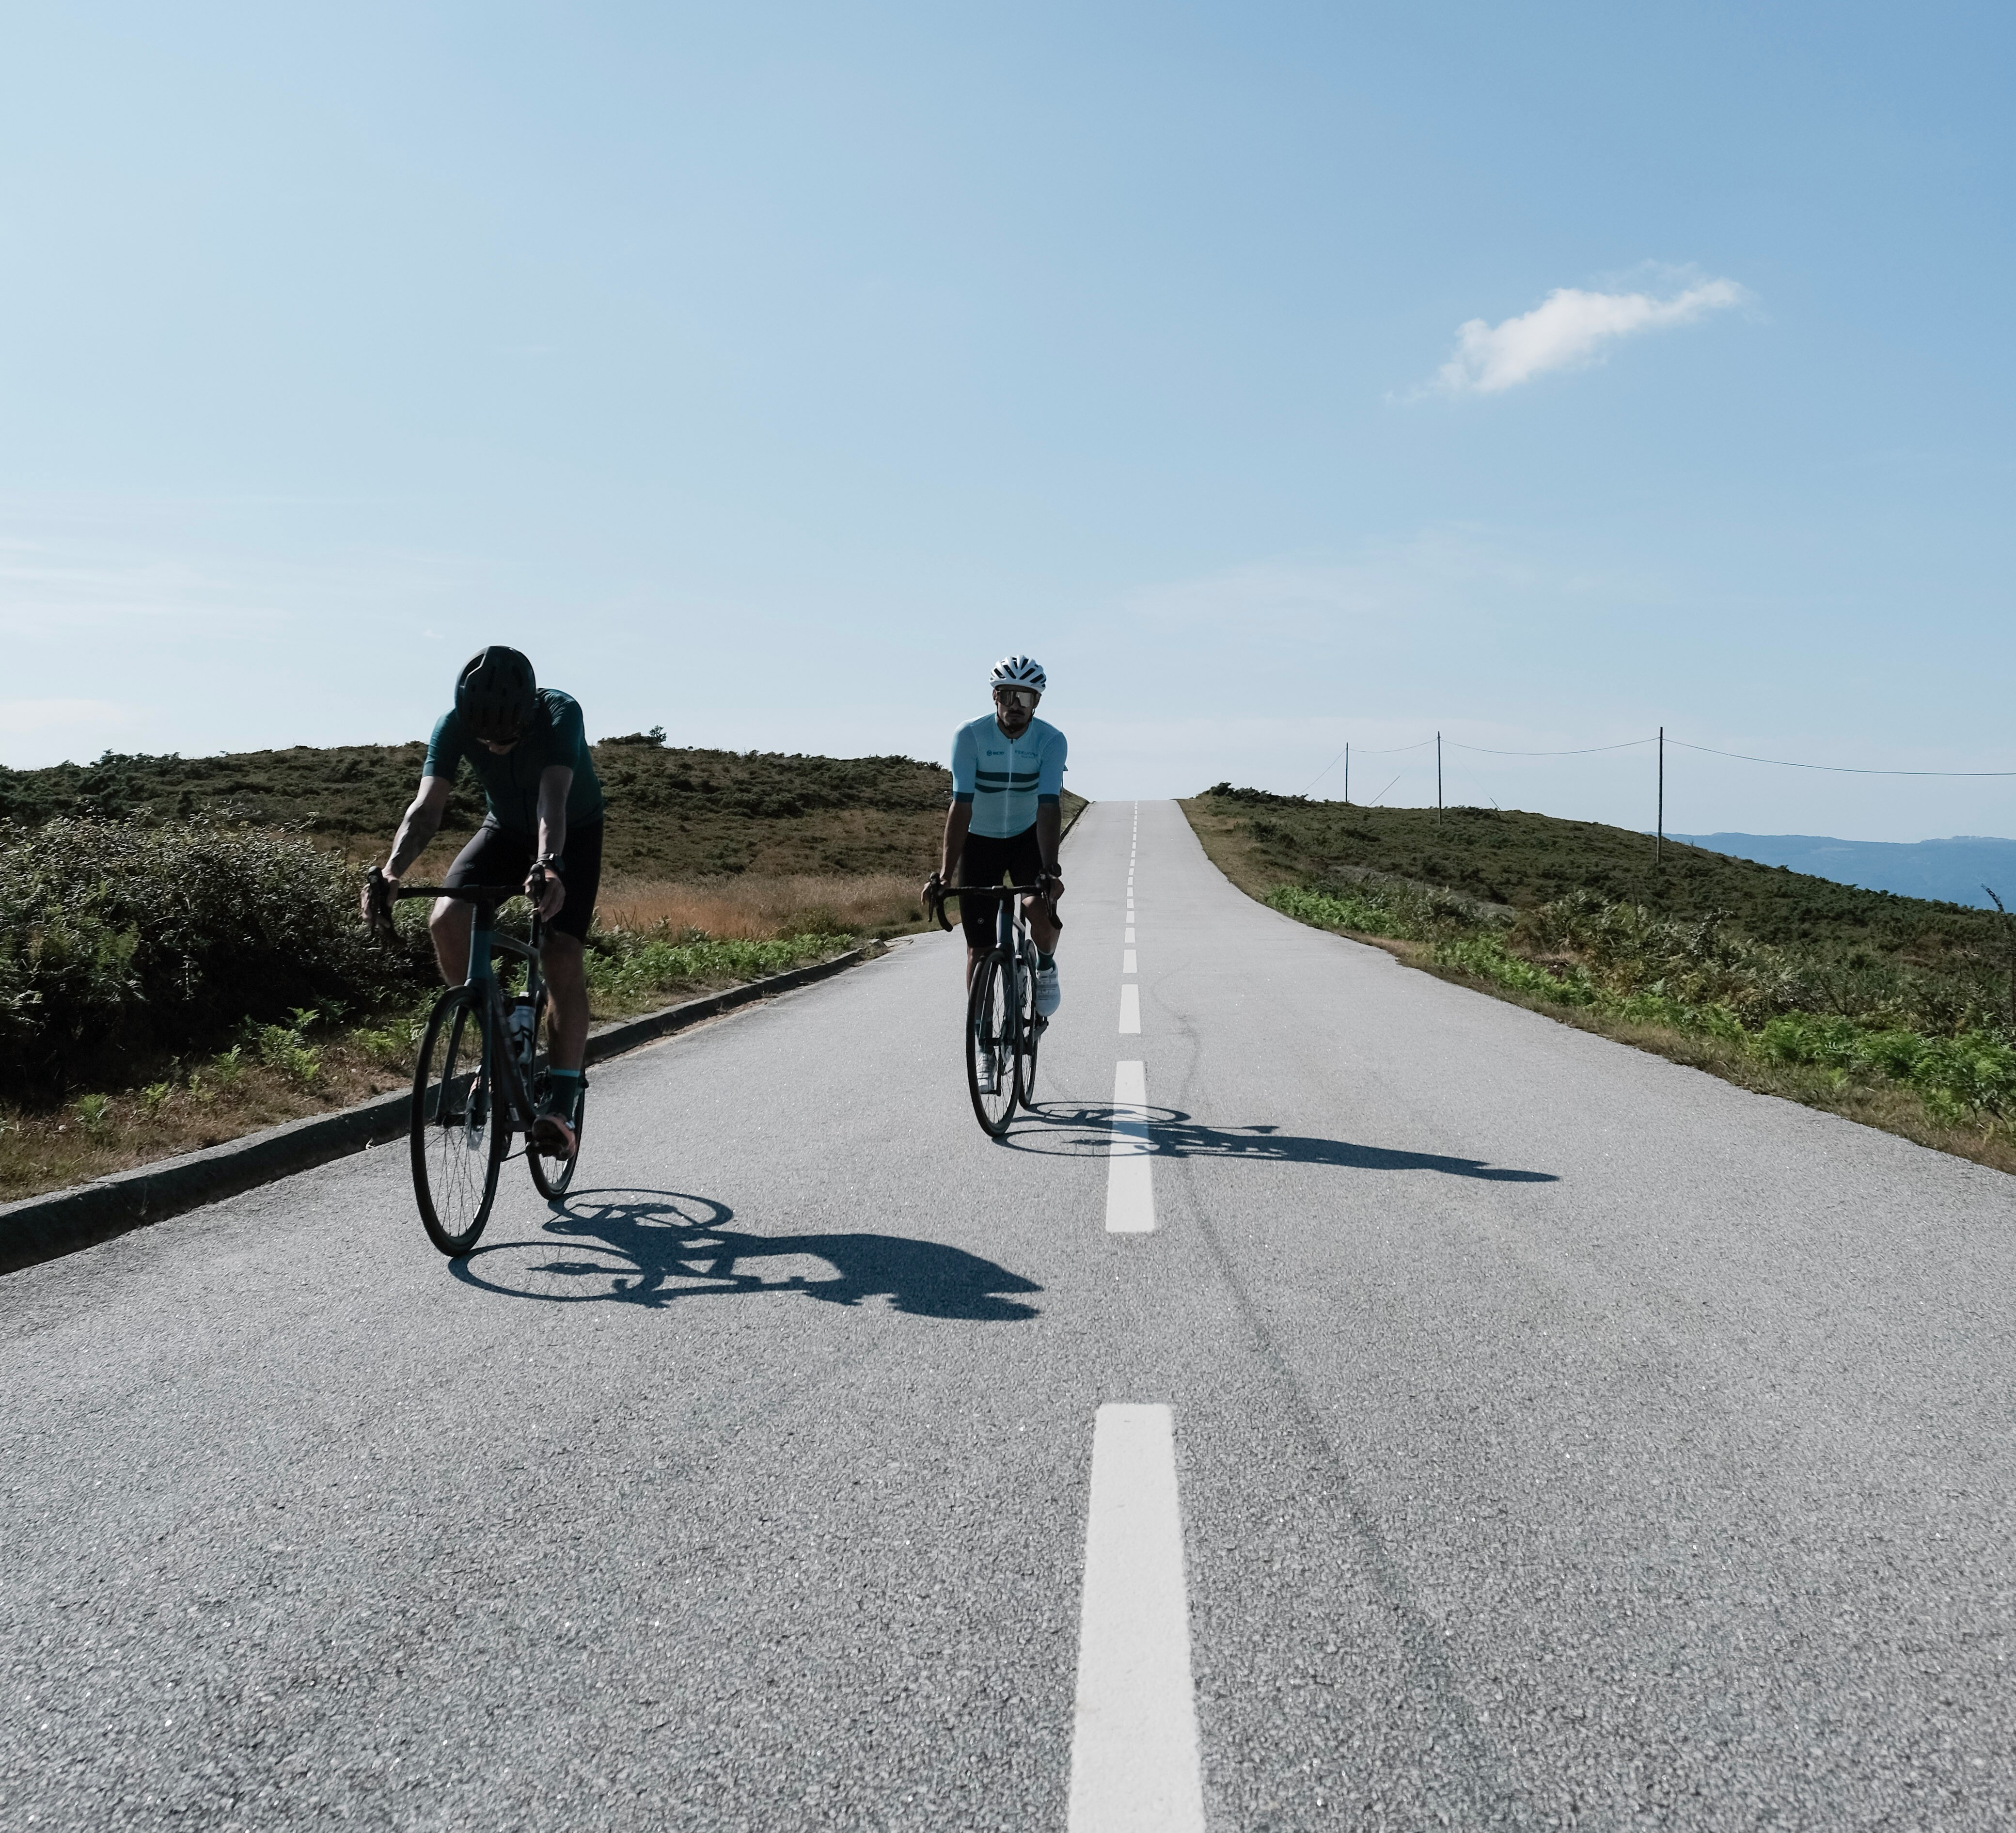 <p><strong>A Different Kind of Holiday</strong></p>
<p>Whether you want an alternative to the standard beach holiday Granfondos are an excellent choice and a great way to explore our coast, the mountains in the interior and the historic villages. In Northern Portugal, cycling lovers will find some of the most beautiful cycling routes in the country, a temperate climate and hospitable people, who like to welcome you with open arms.</p>
<p><br /><strong>FeelViana packages</strong></p>
<p>At FeelViana sport hotel we want you to have truly unique and unforgettable holidays. Our bespoke packages include VIP passes to the main Granfondos in the North of Portugal, training tours, accommodation, meals and a massage. We <span>have 7-day packages with lots of different routes and other outdoor and indoor options to help make this trip unforgettable.</span></p>